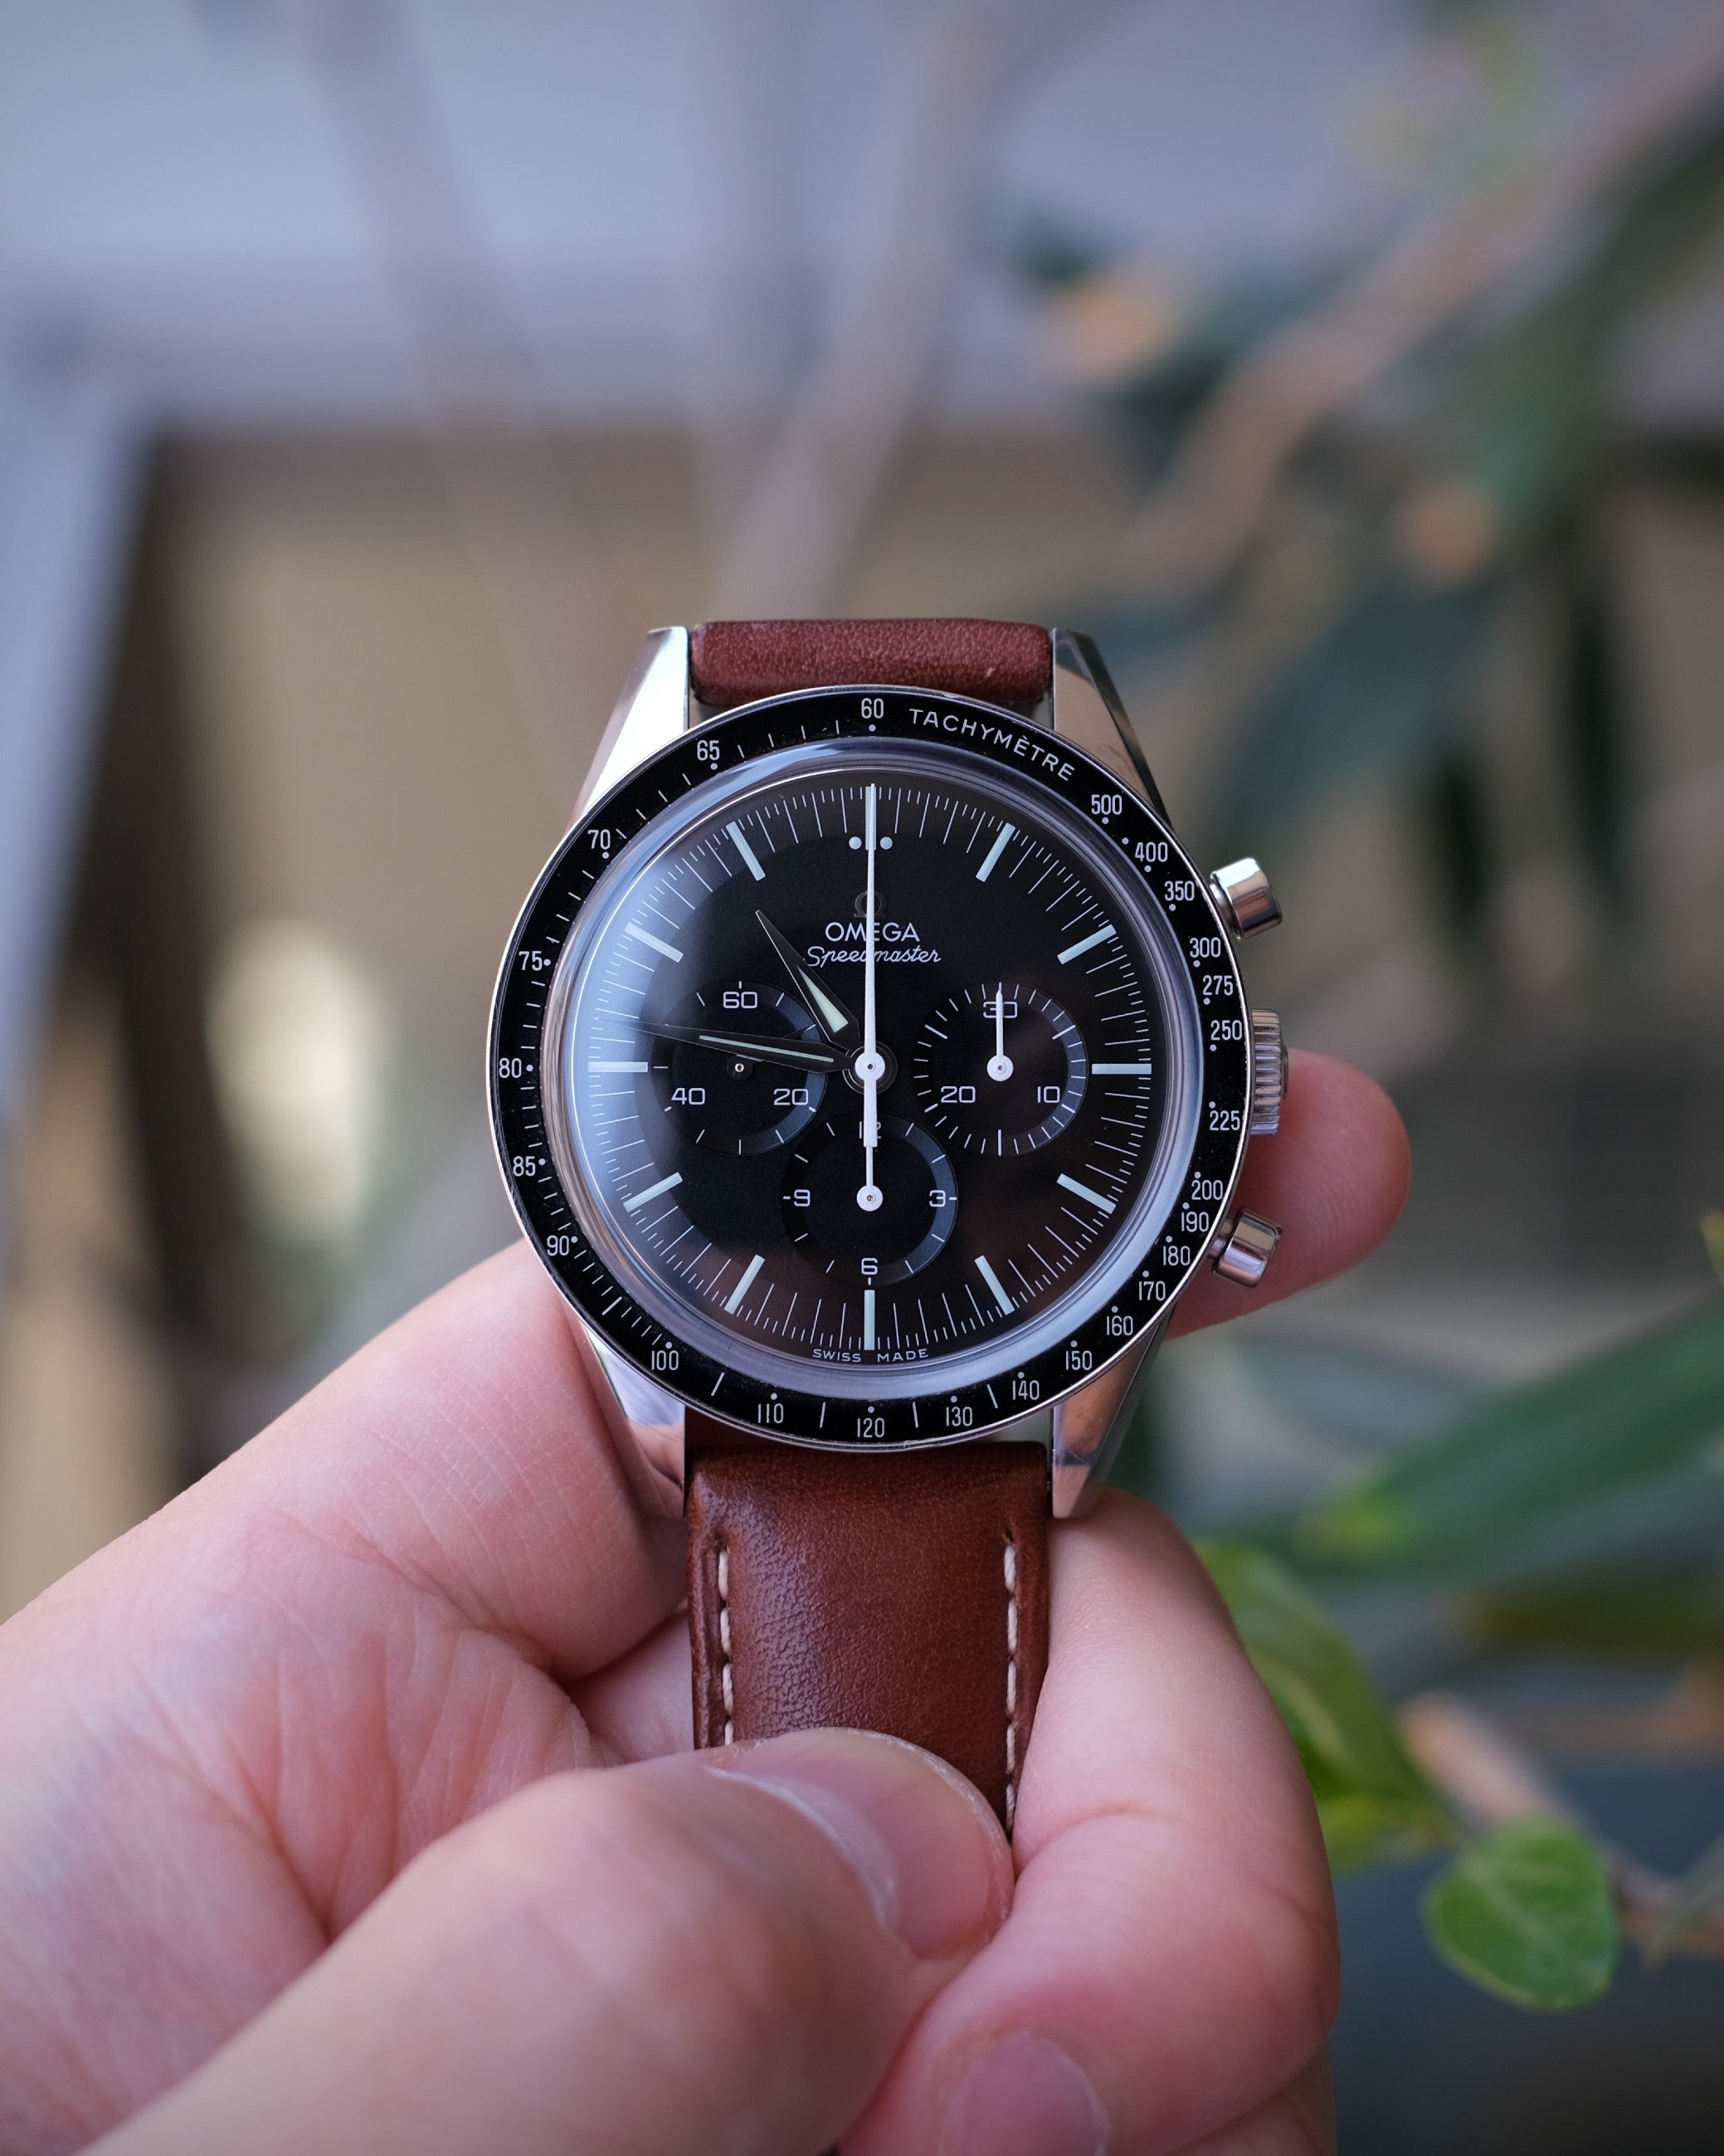 Omega Speedmaster "First Omega In Space"